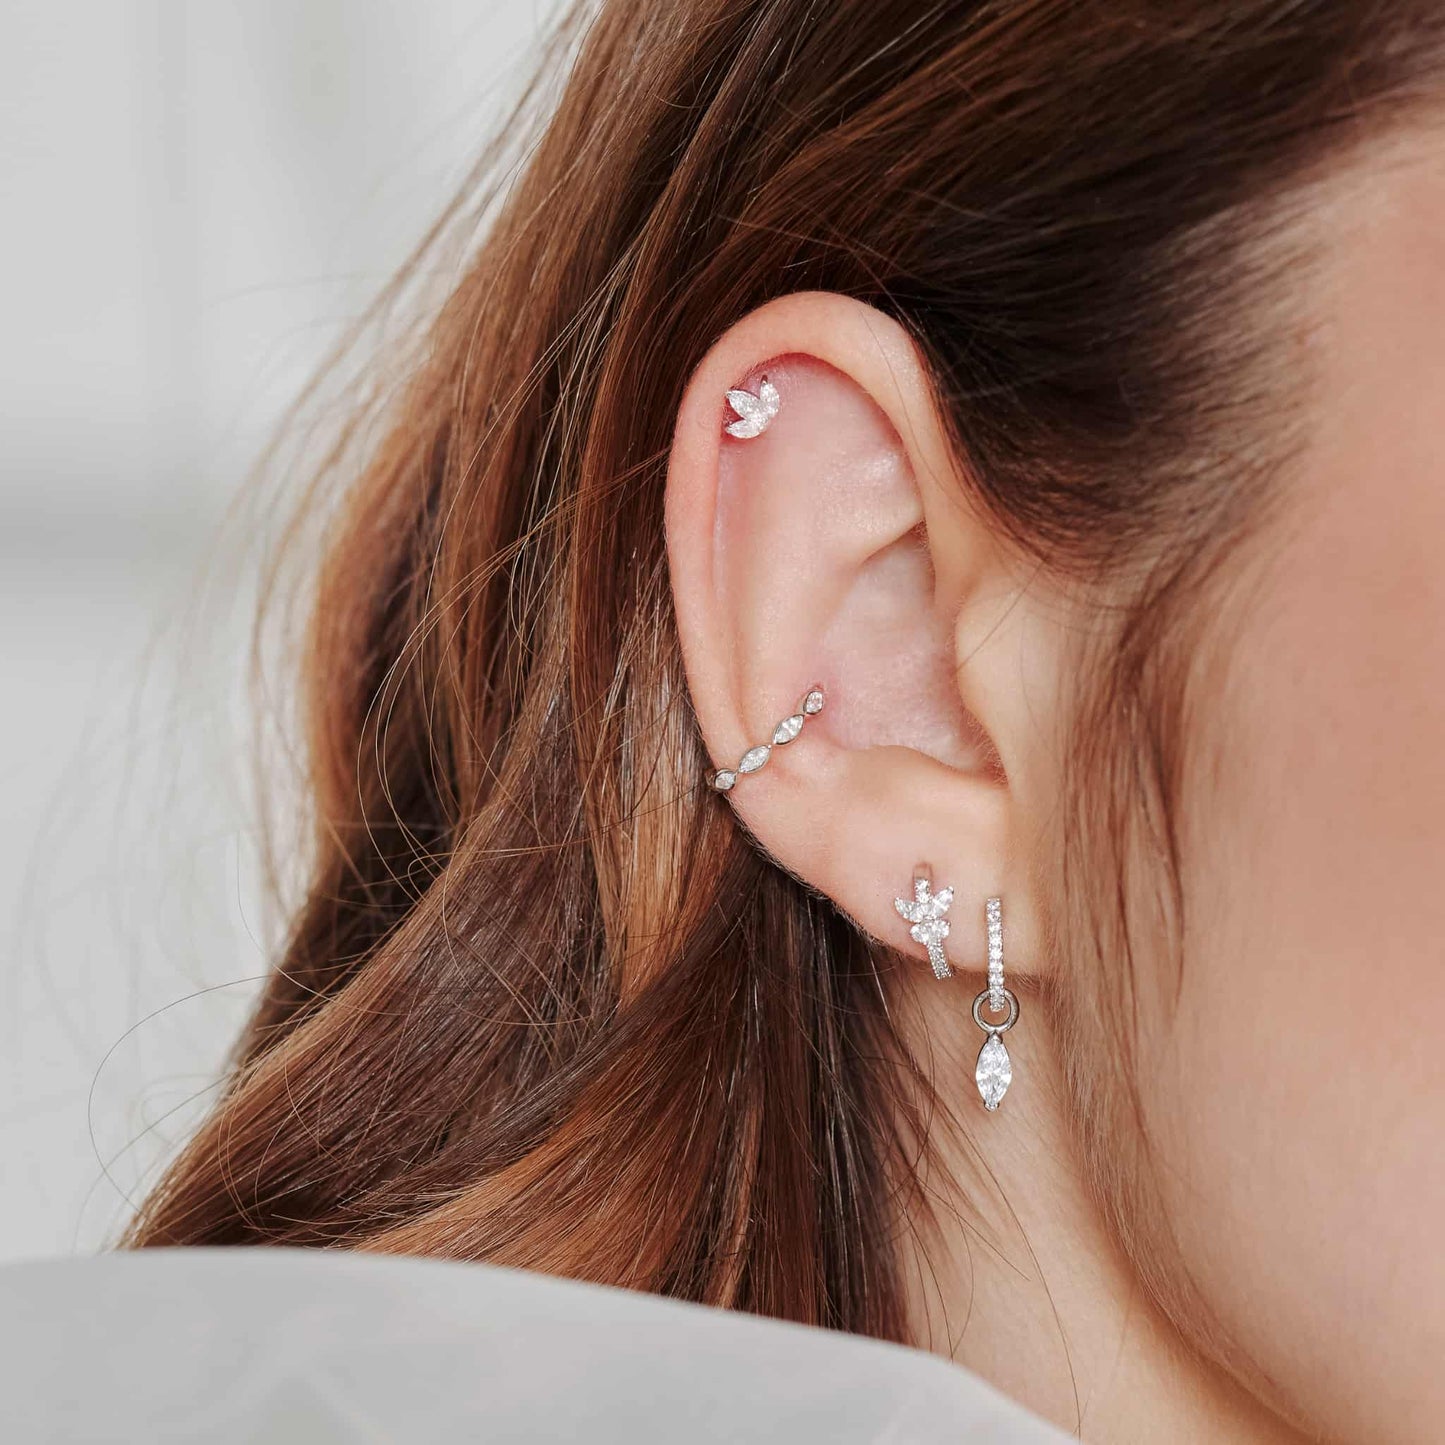 Ear with the Hoop Earring Charms